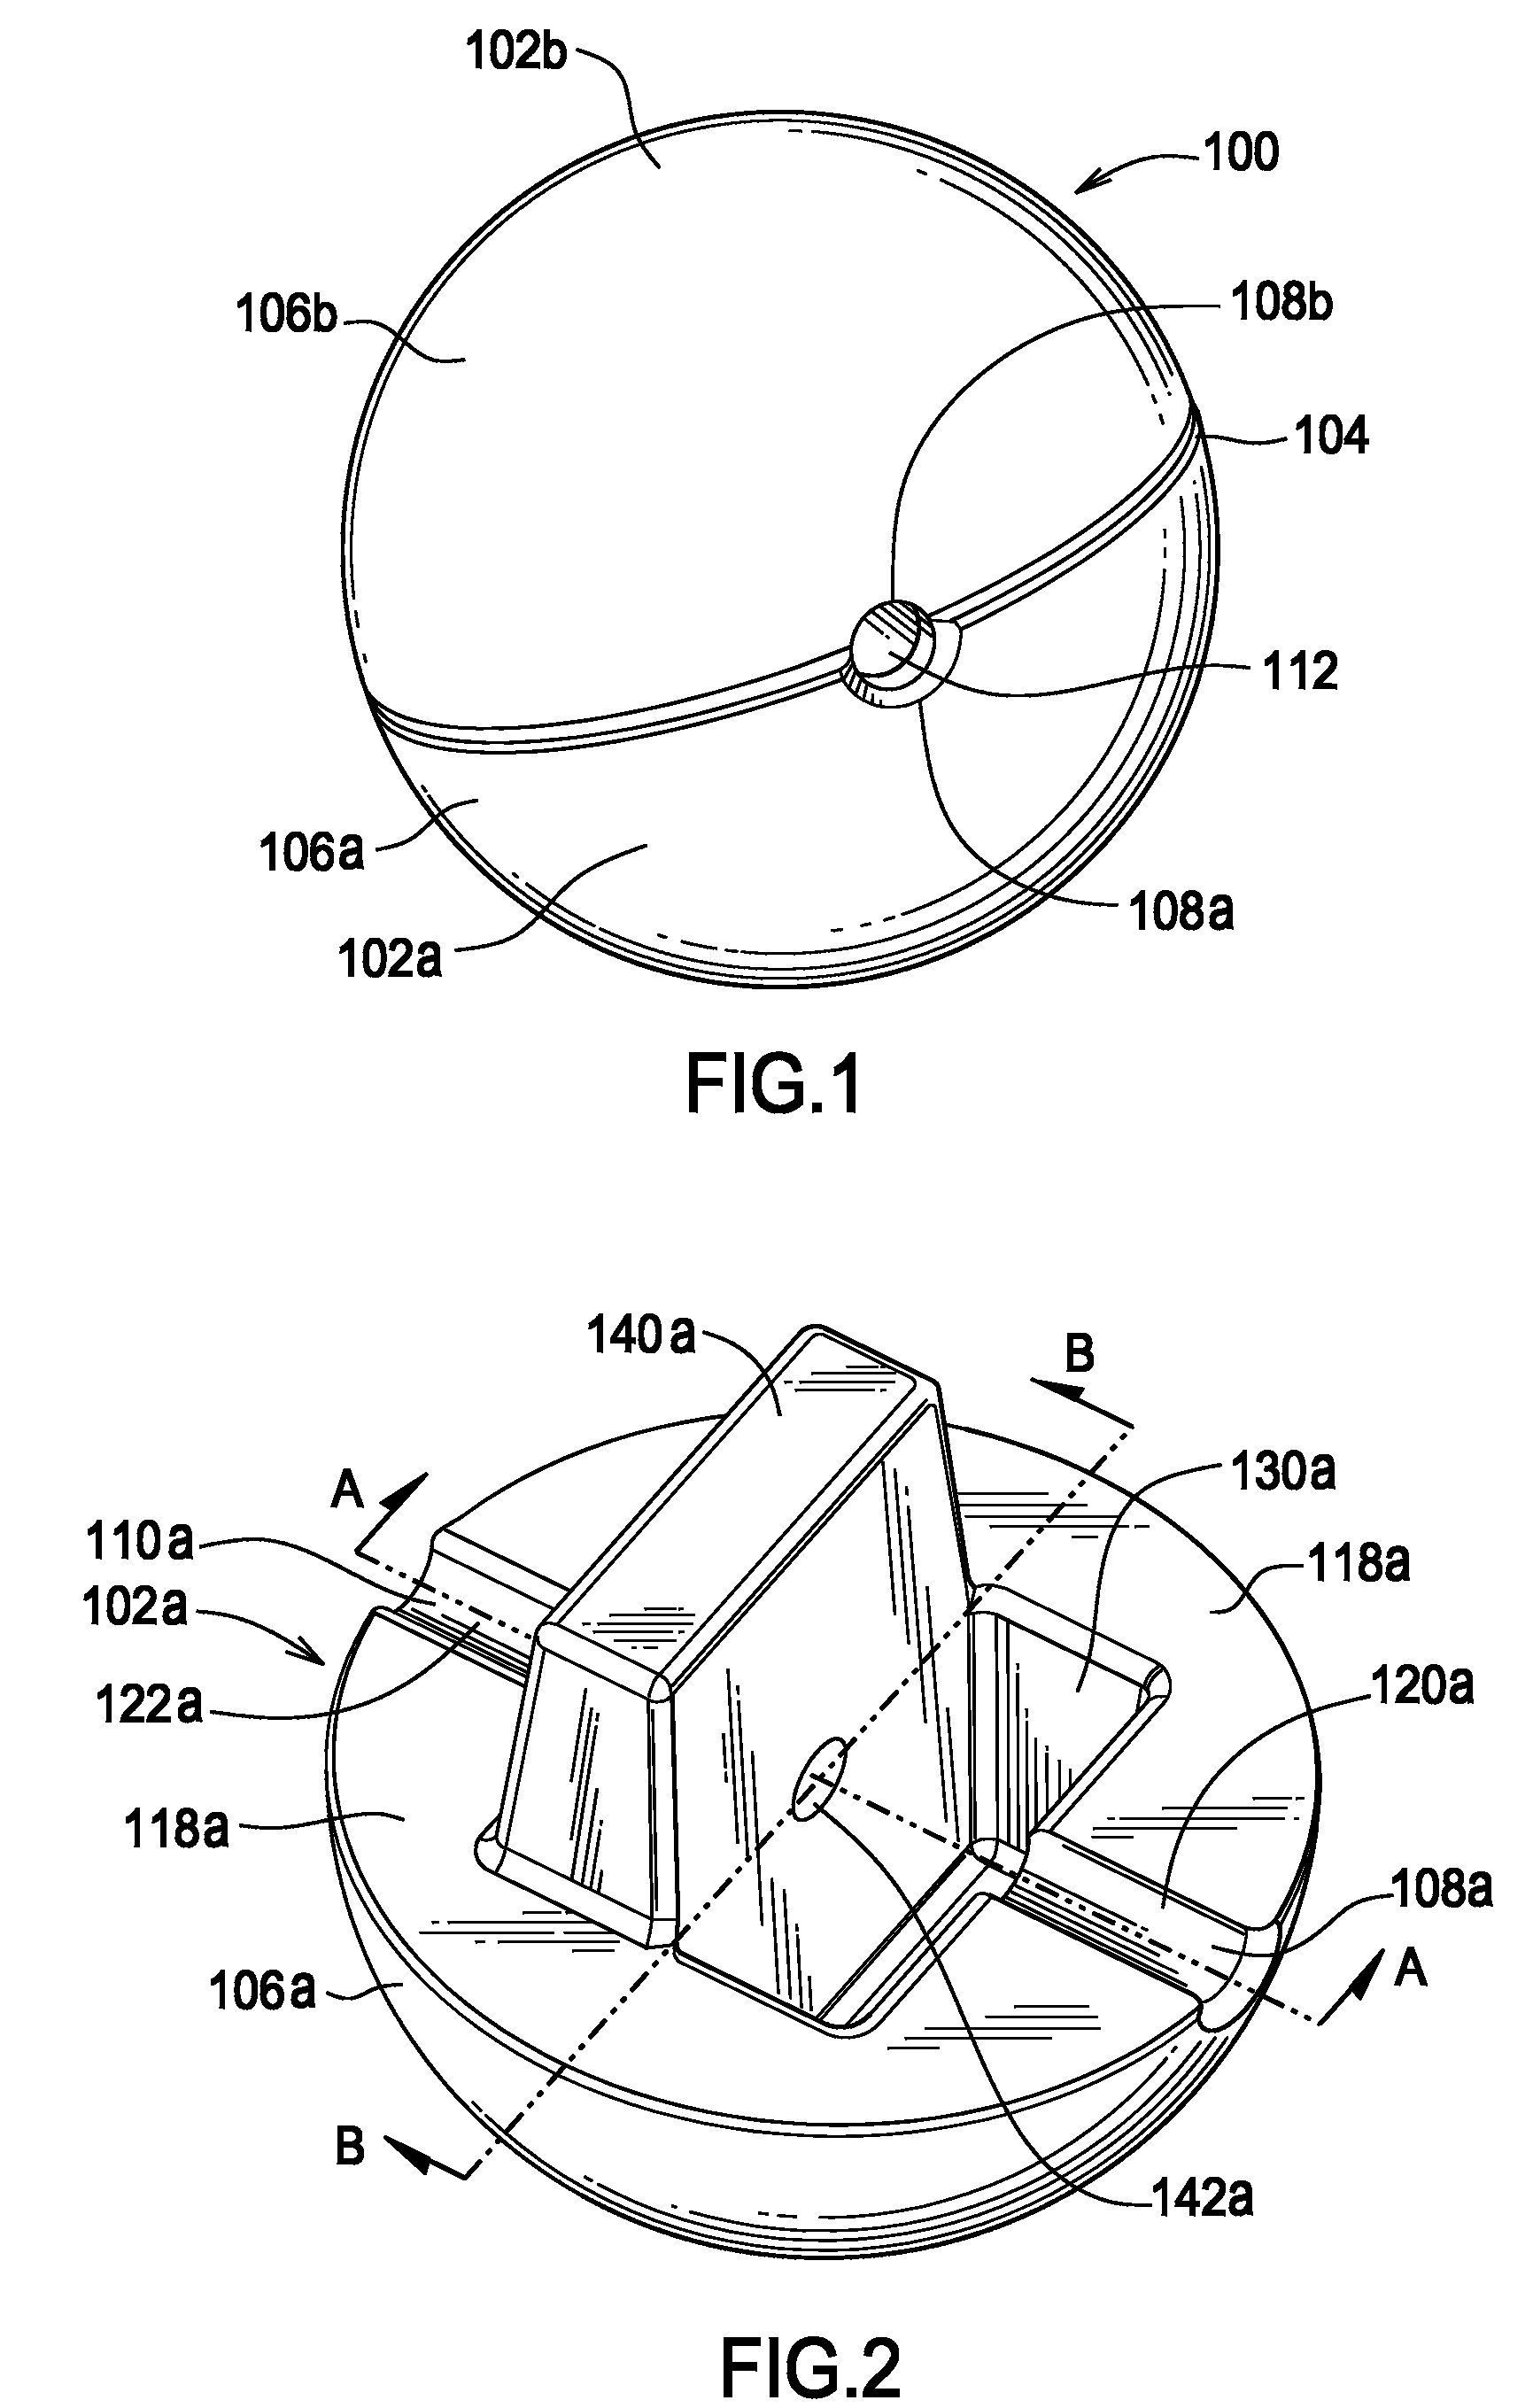 Illuminated ball and mating element for forming such ball